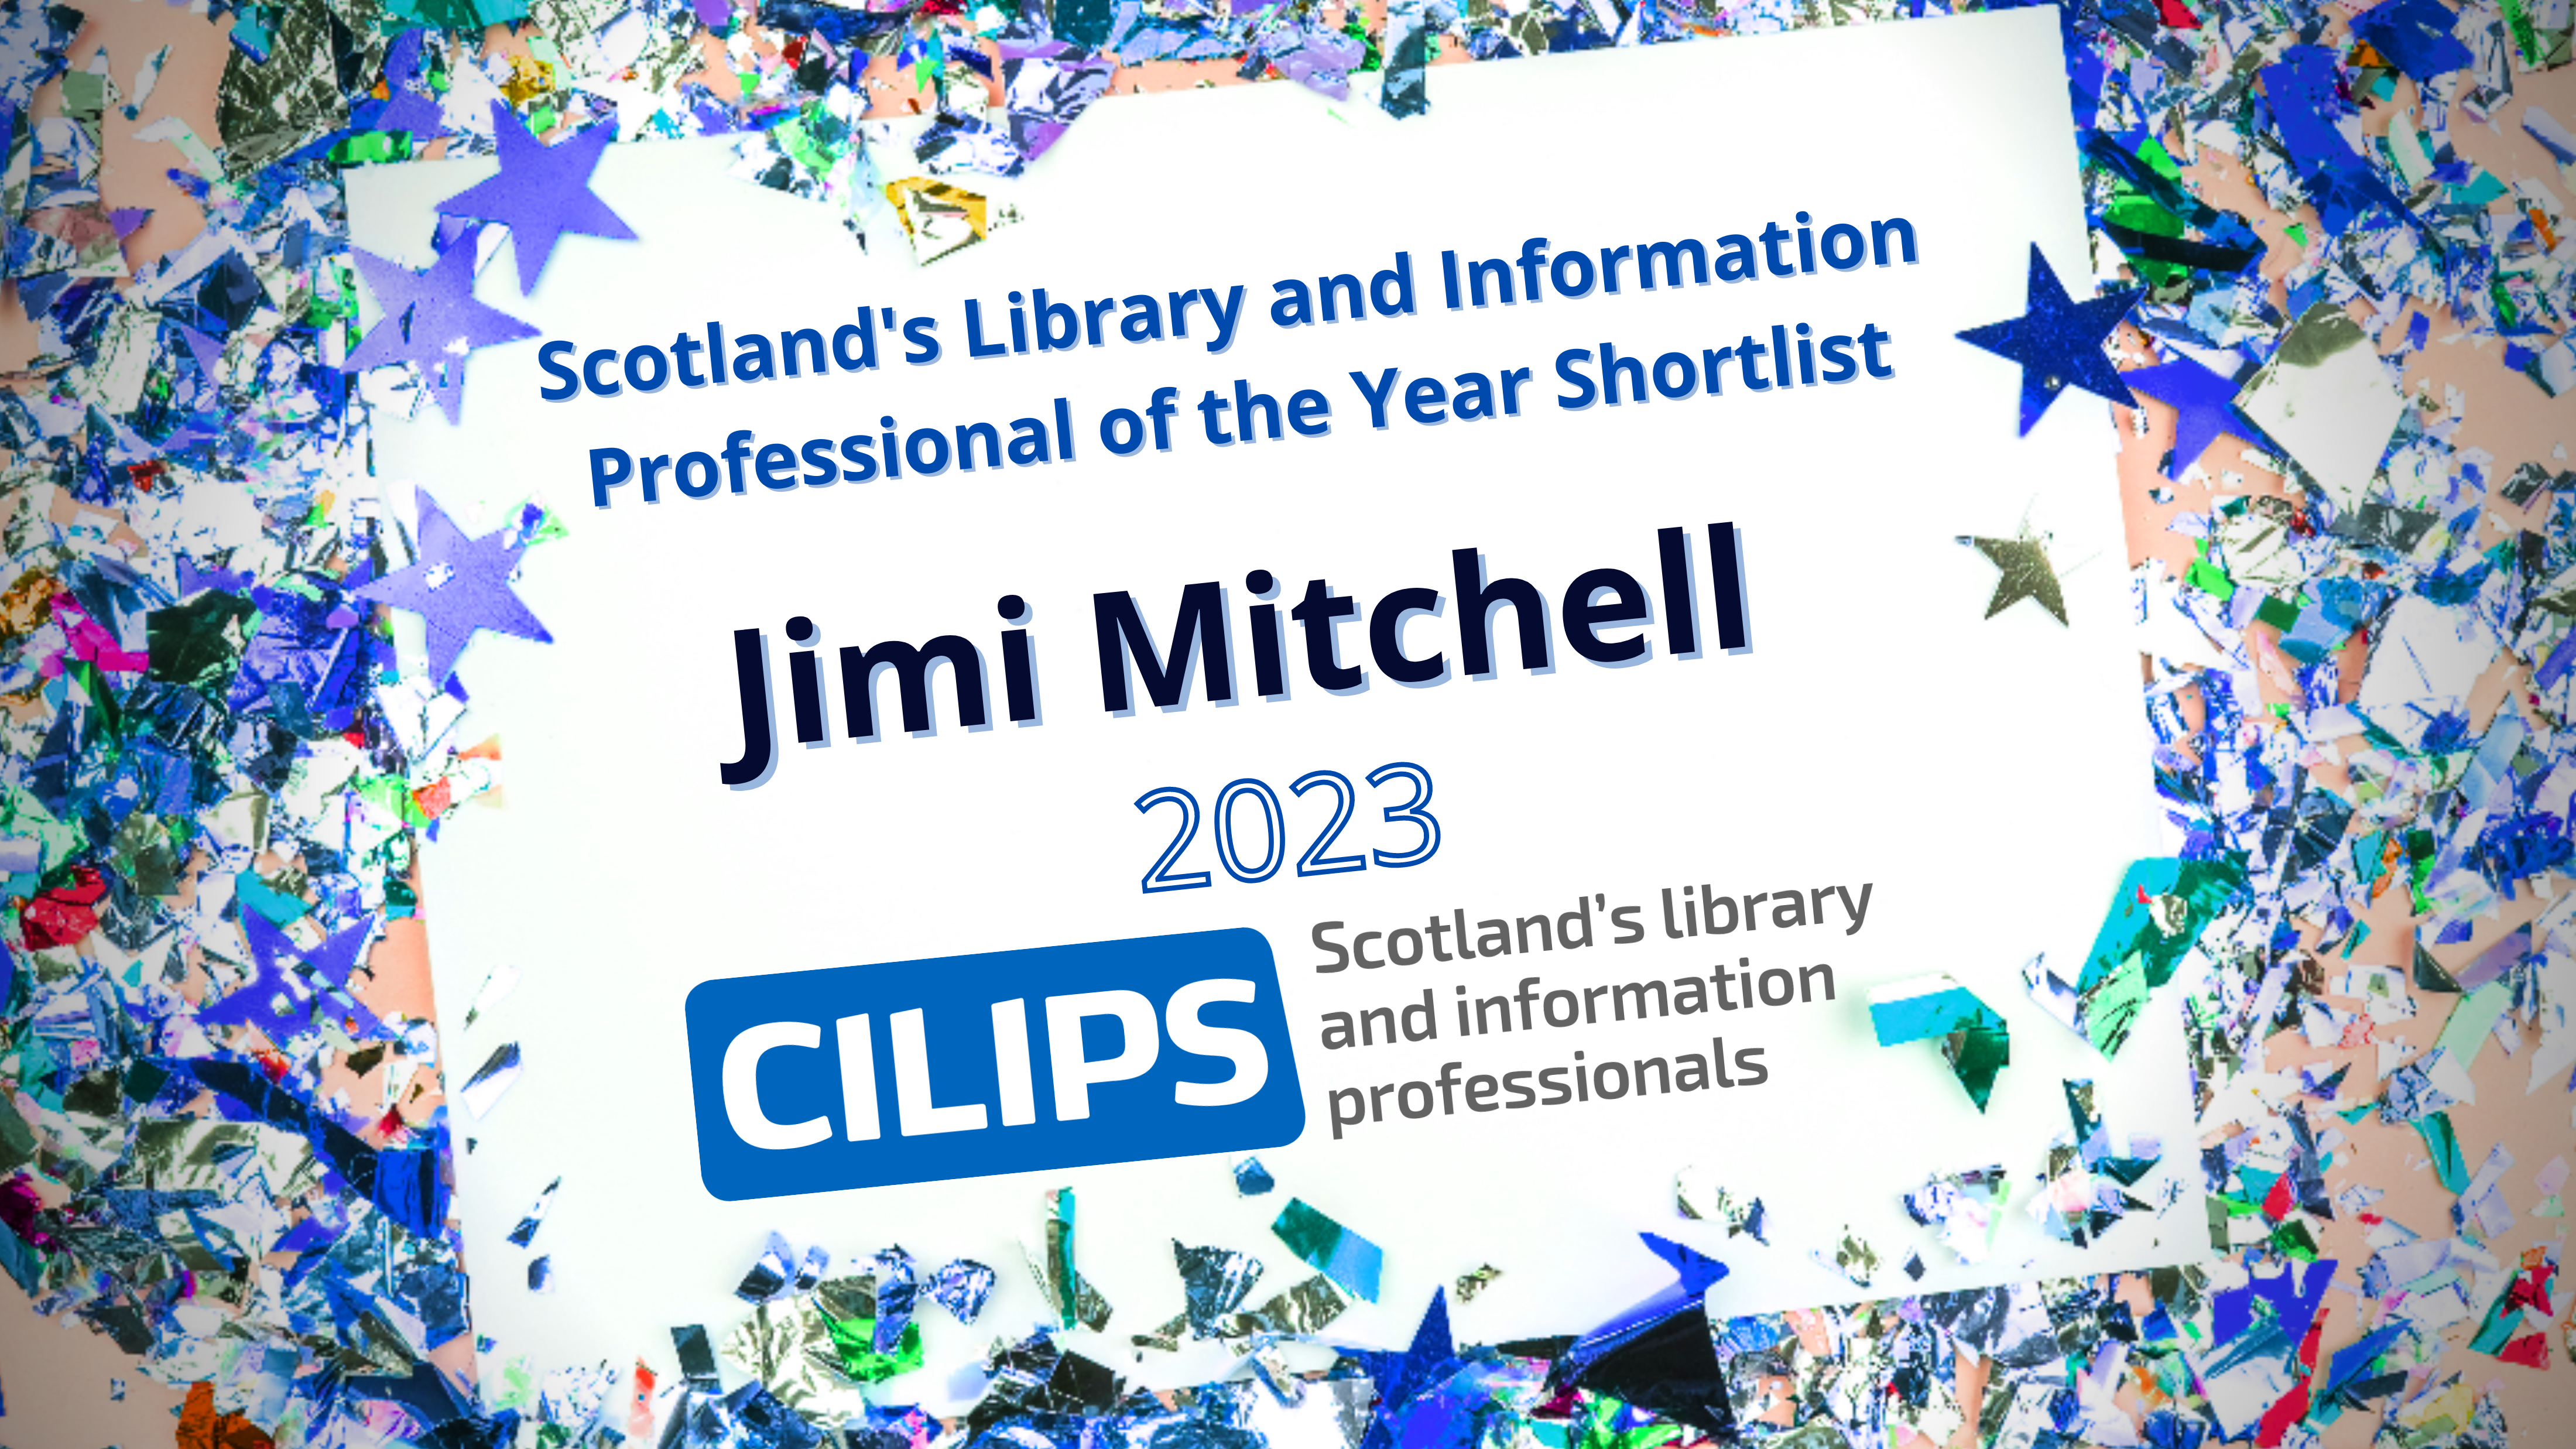 Scotland's library and Information Professional of the Year Shortlist. Jimi Mitchell, 2023. CILIPS blue and grey logo. White paper background with mixed blue confetti around the outside.